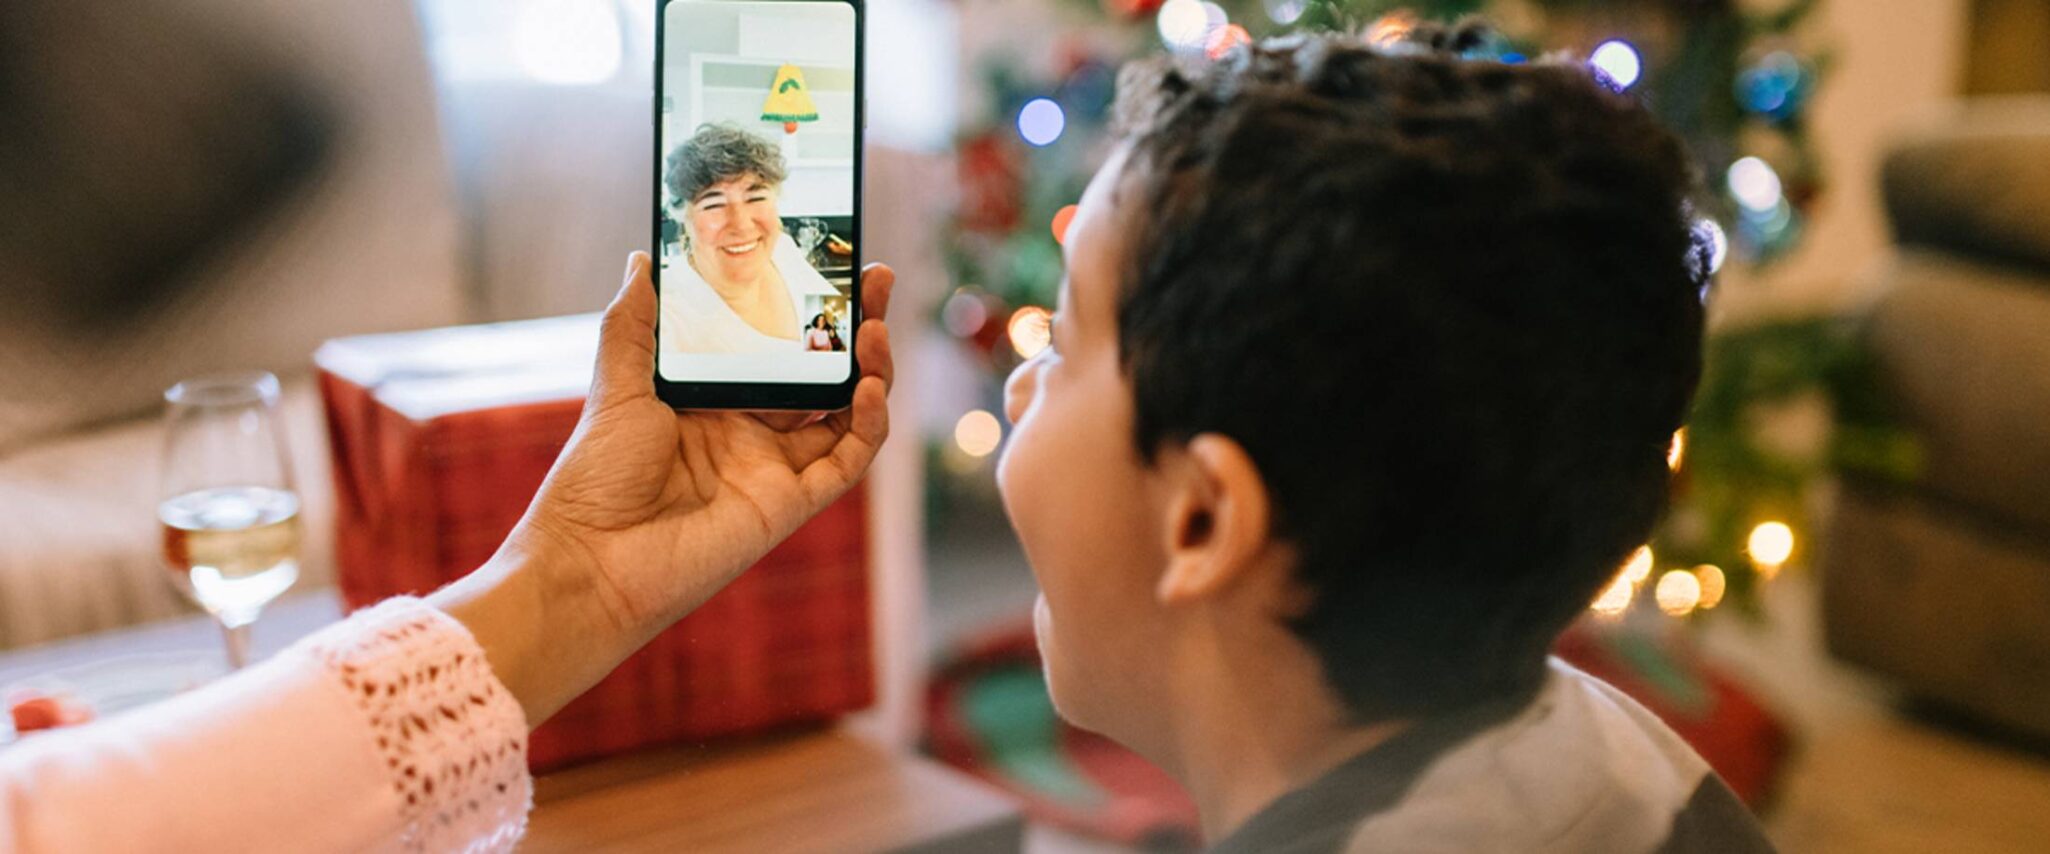 A grandson talks to his grandmother through Facetime or video call on Christmas